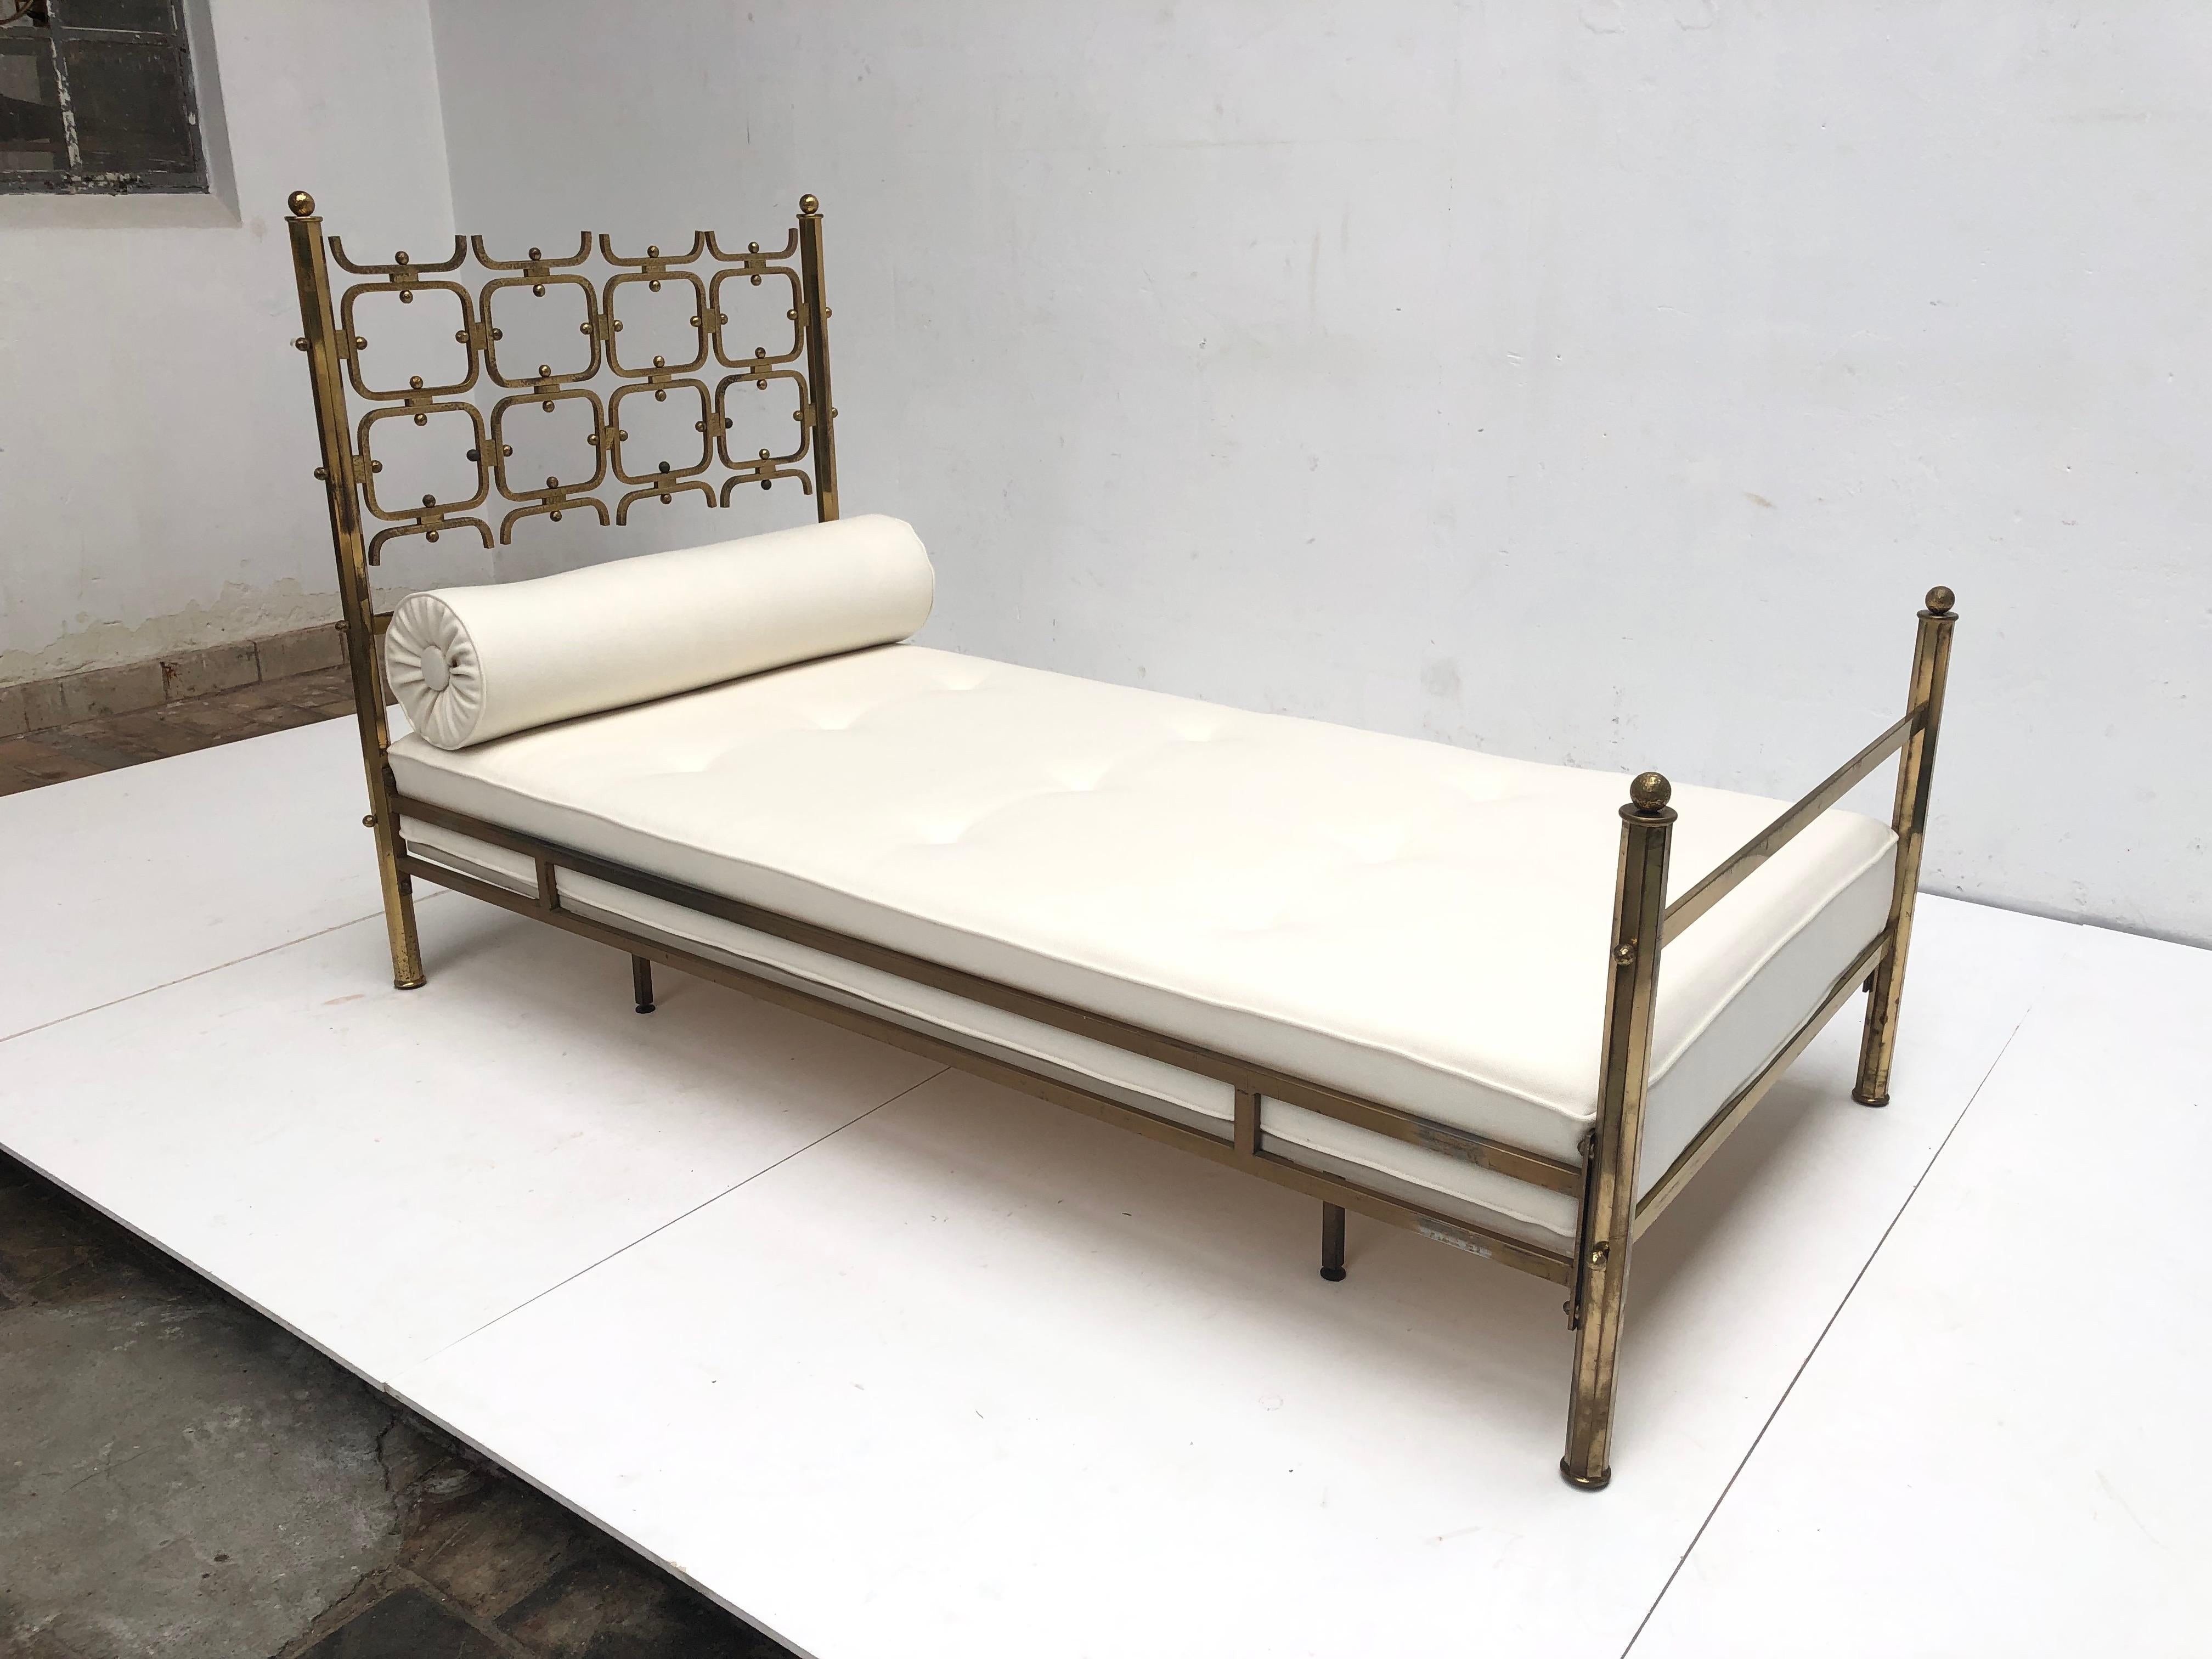 Beautiful and important  sculpturakl form brass single  bed or day bed  circa 1958-1963  by Osvaldo Borsani for 'Arredamento Borsani', Varedo , Italy.

The small series of  Borsani beds designed  were produced in several different designs ,each in